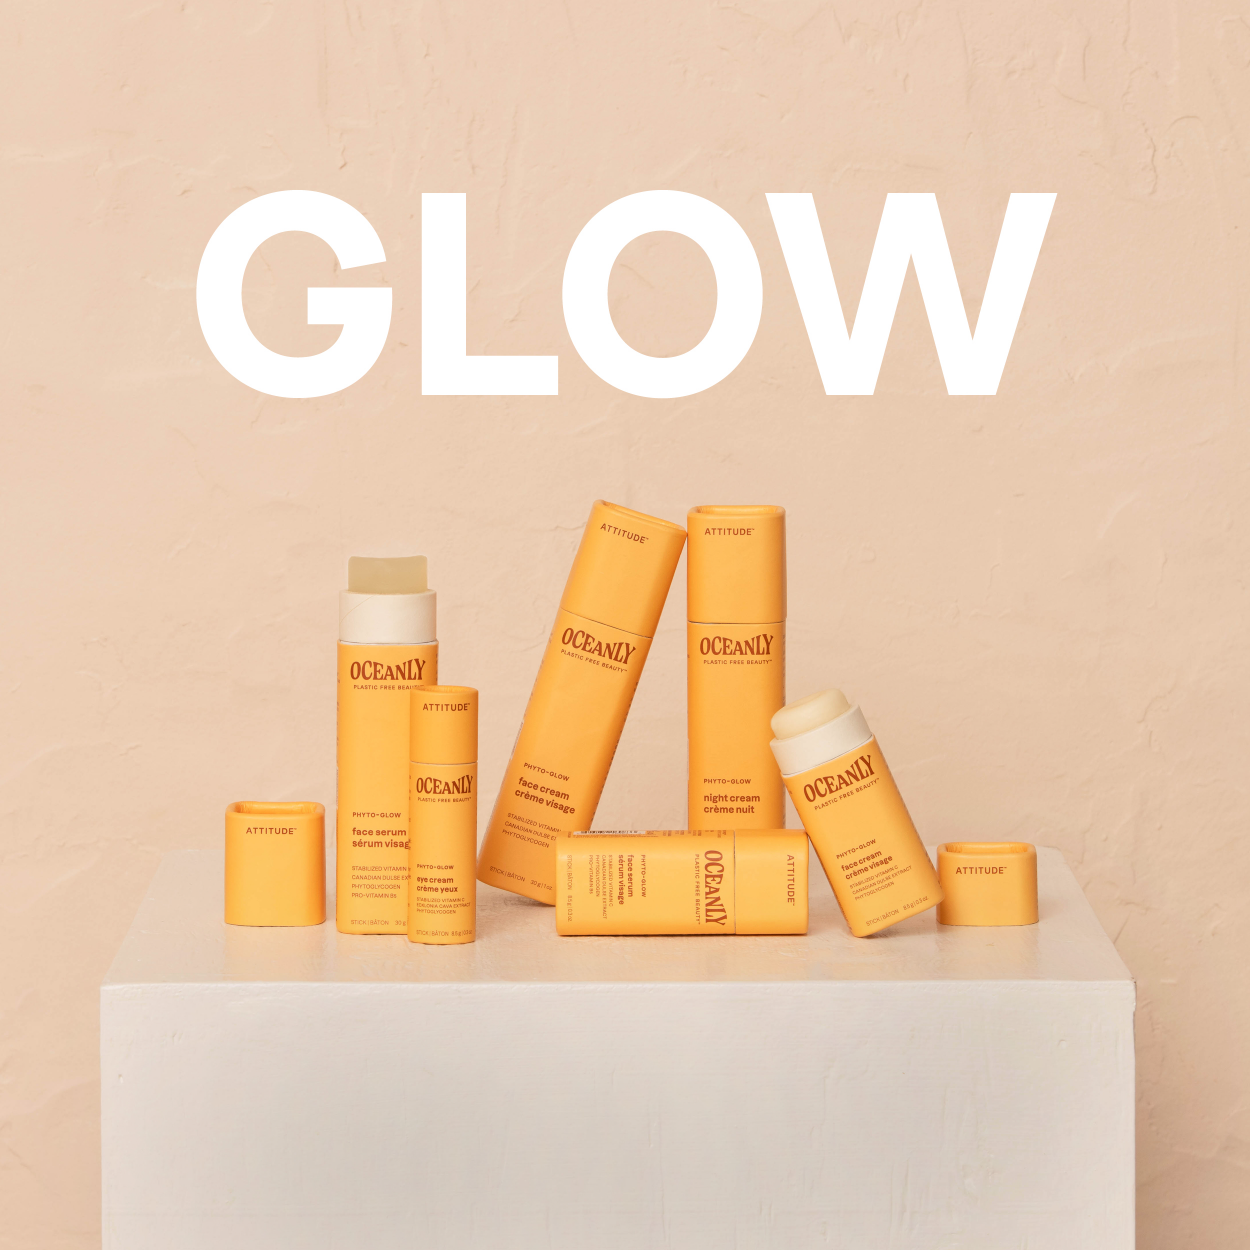 image of Phyto-Glow product line using vitamin c for skincare.